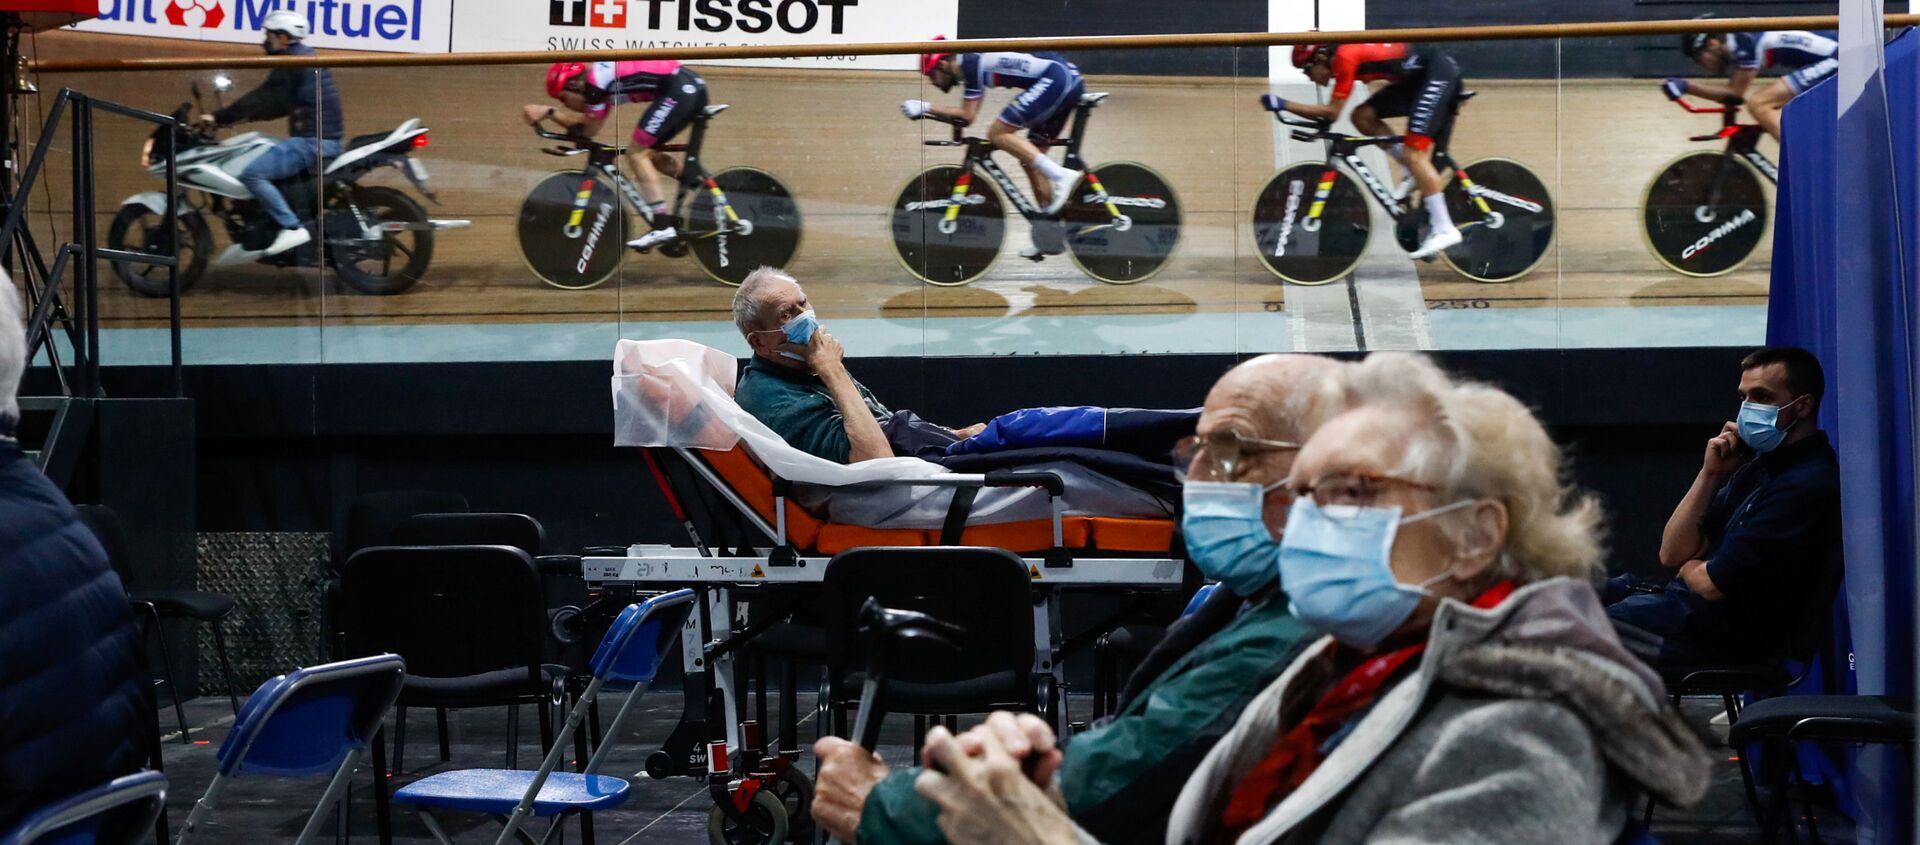 France's national cycling team trains as people wait to get a dose of the Comirnaty Pfizer-BioNTech COVID-19 vaccine as part of the coronavirus disease vaccination campaign at the indoor Velodrome National of Saint-Quentin-en-Yvelines in Montigny-le-Bretonneux, southwest of Paris, France, March 26, 2021 - Sputnik International, 1920